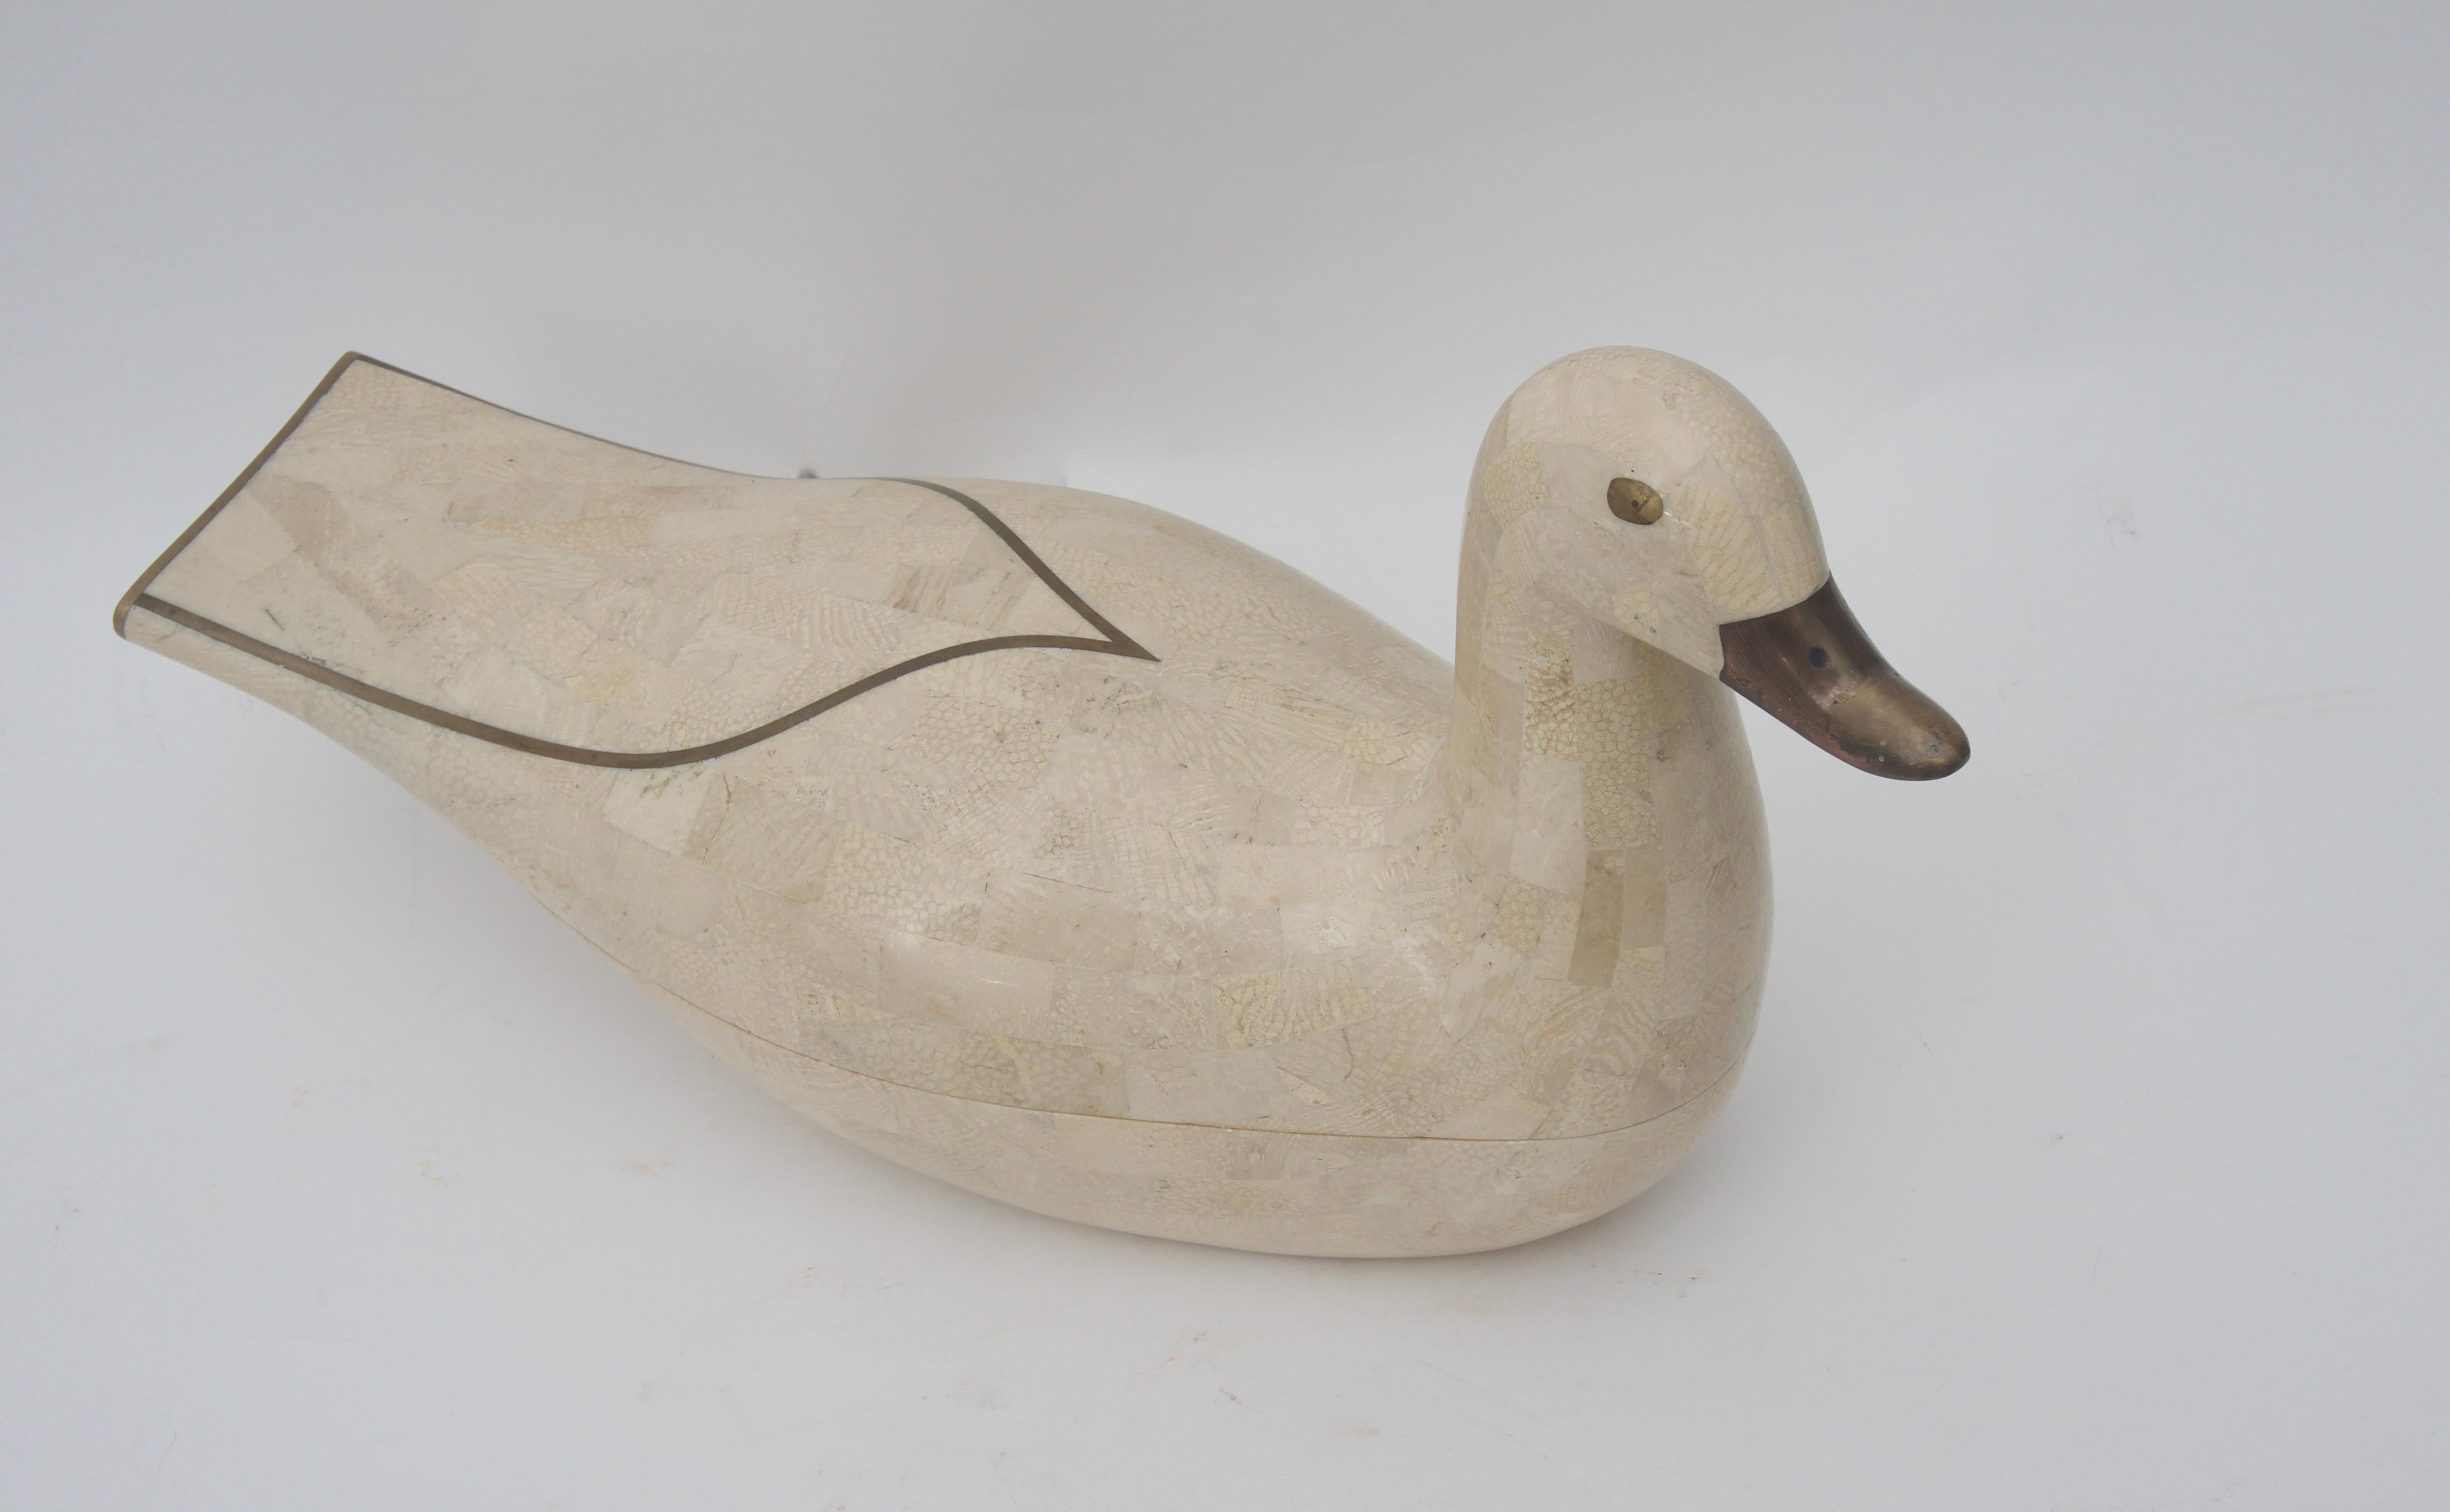 This stylish and charming Maitland Smith duck box will make a great place to hide the remote, car keys or desk accessories.